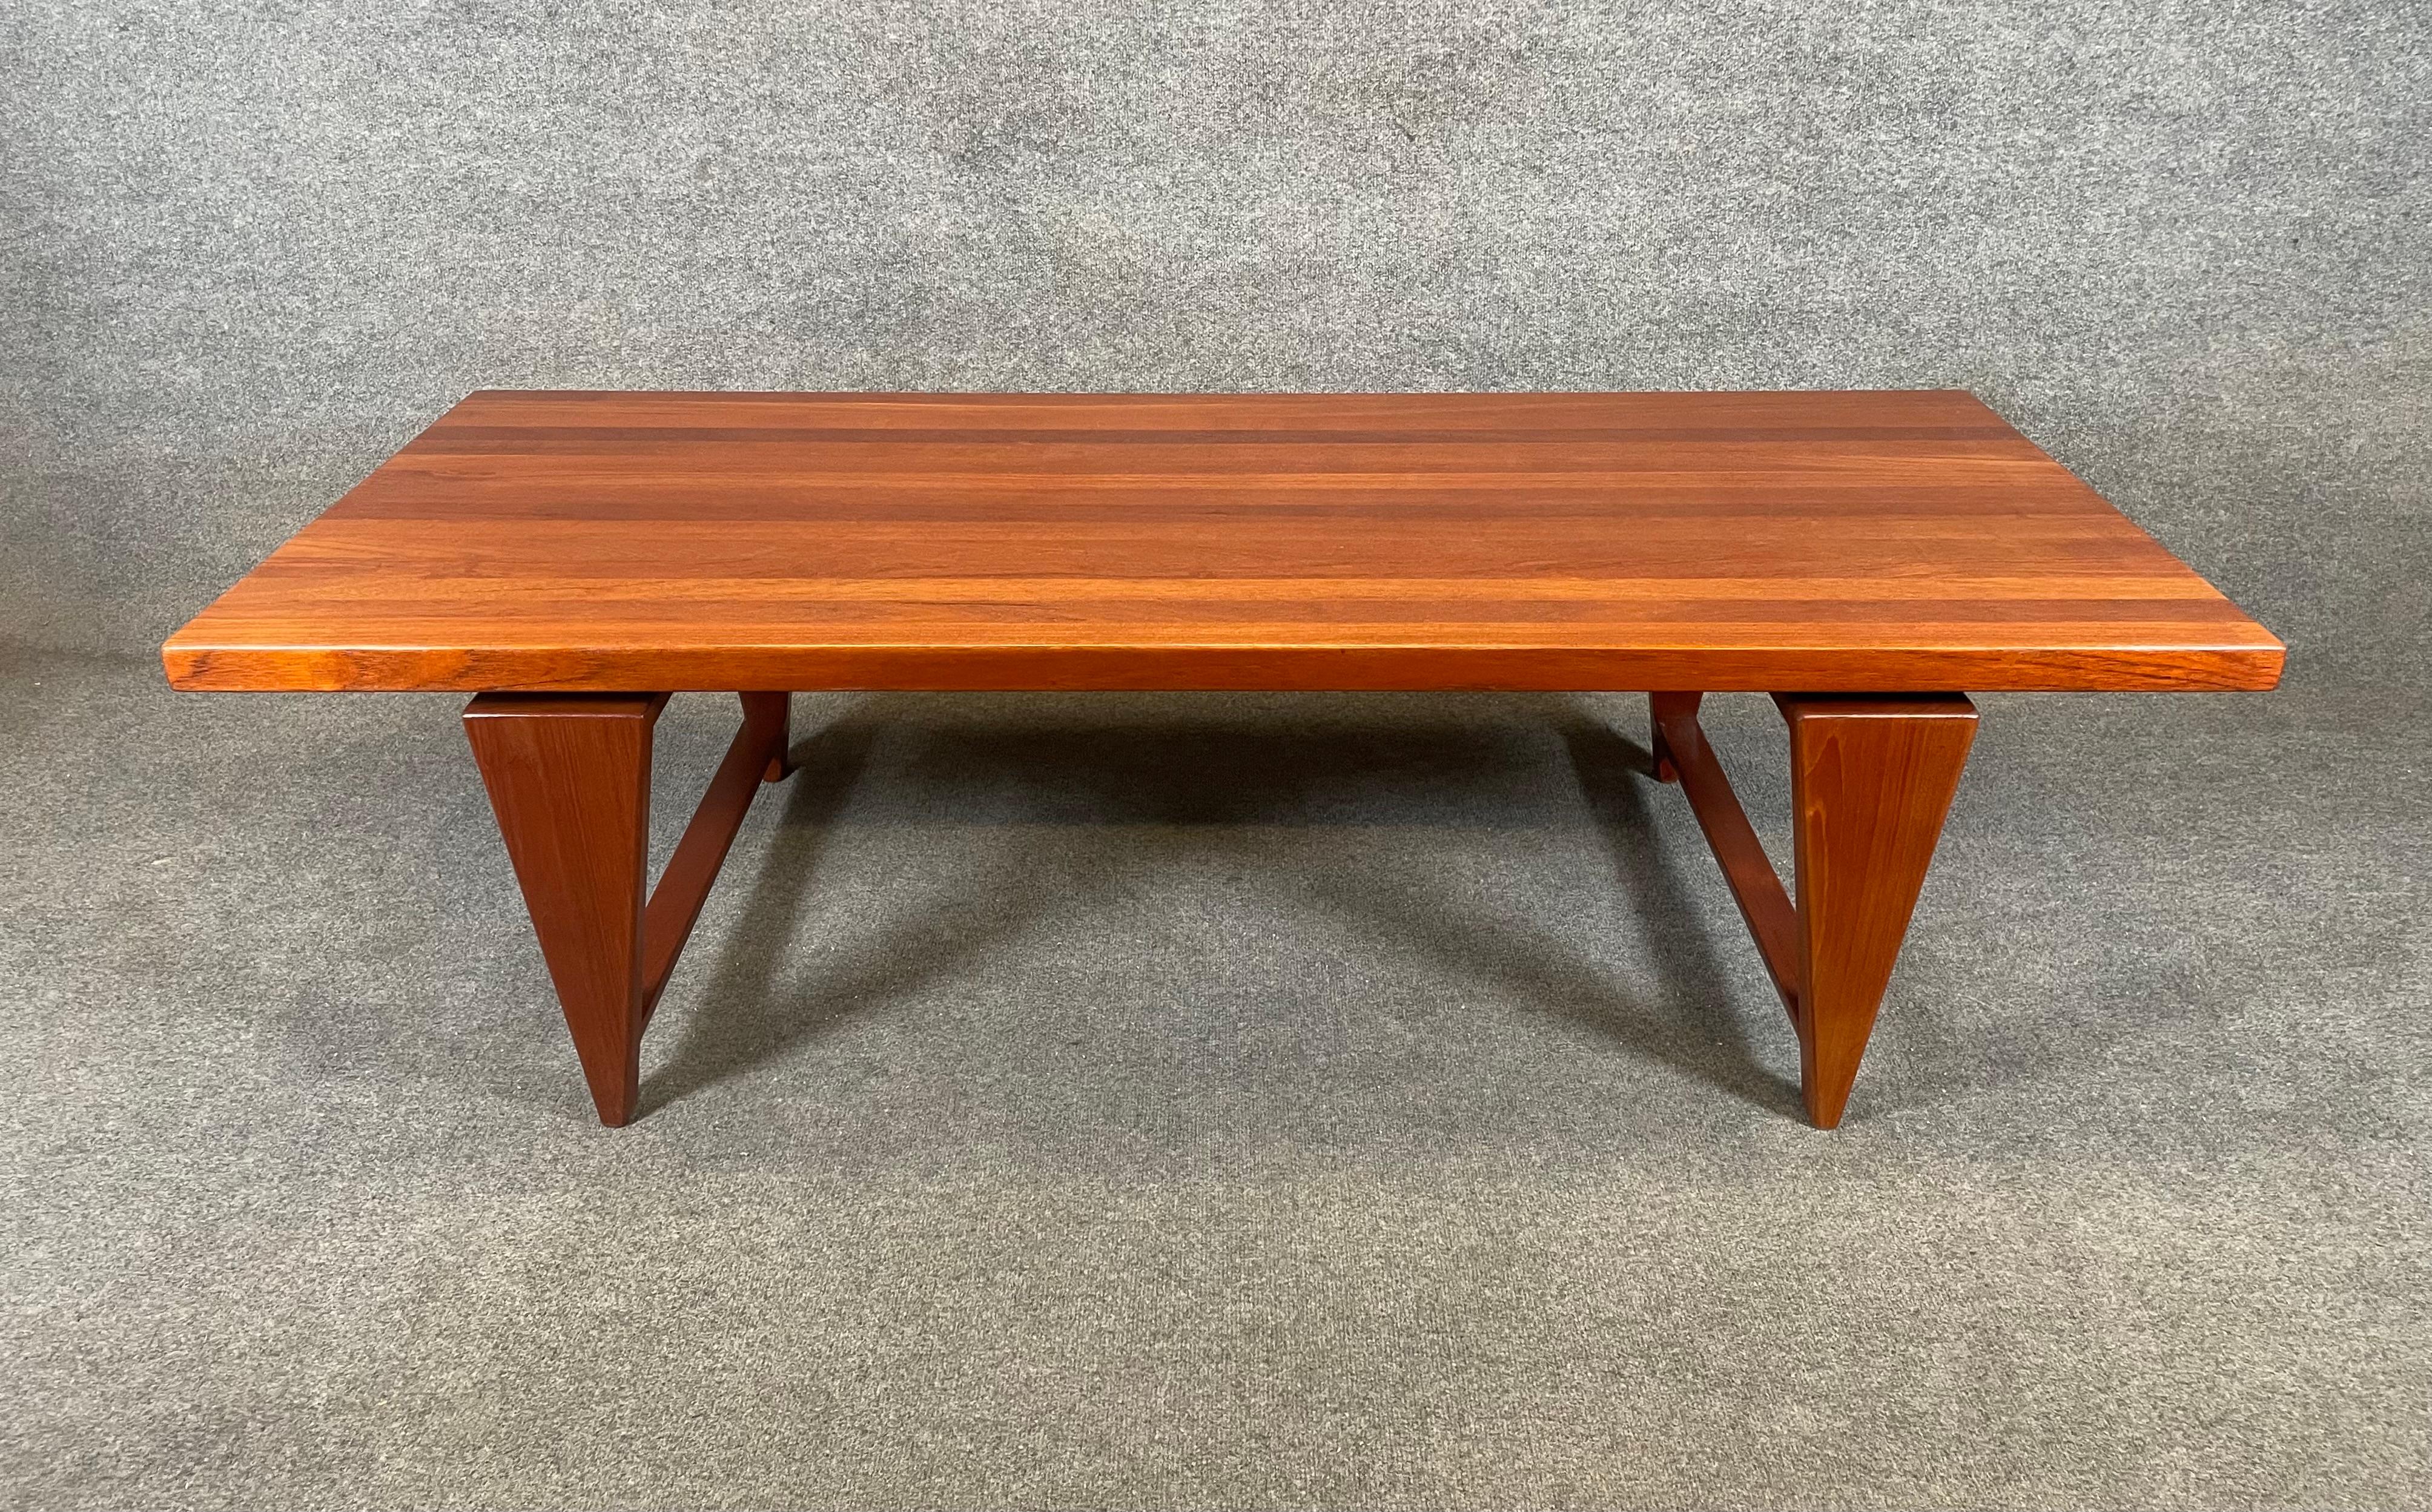 Here is a beautiful Scandinavian modern cocktail in solid teak designed by Illum Wikkelso and manufactured by Mickael Laursen in Denmark in the 1960's.
This special table, recently imported from Europe to California before its refinishing, features